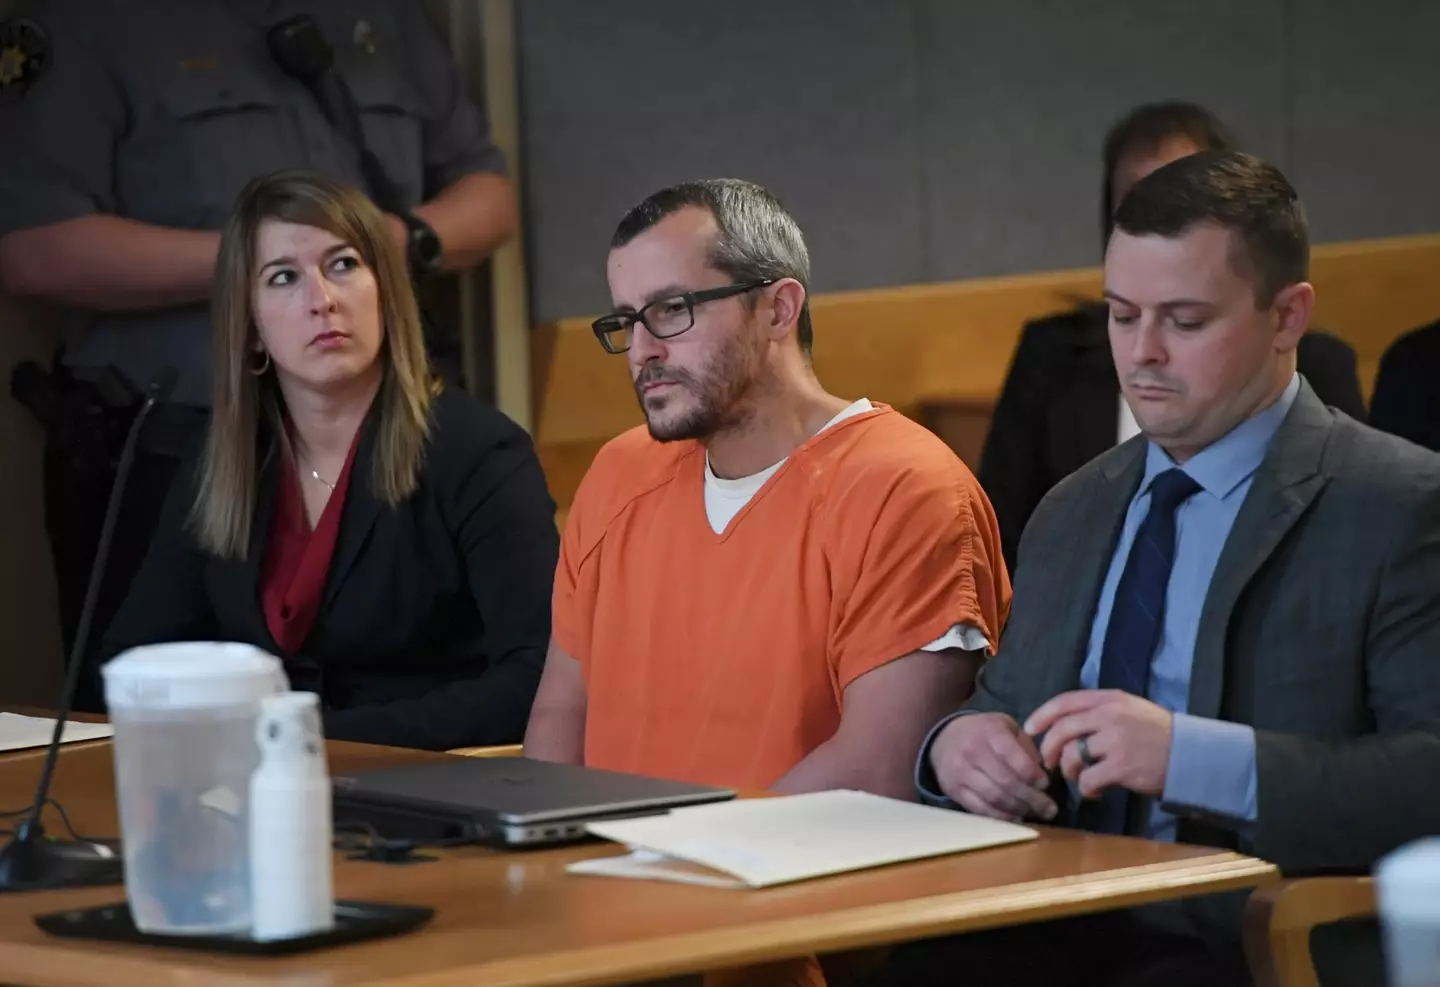 Chris Watts' female pen pals think he's innocent, even though he confessed to the killings.